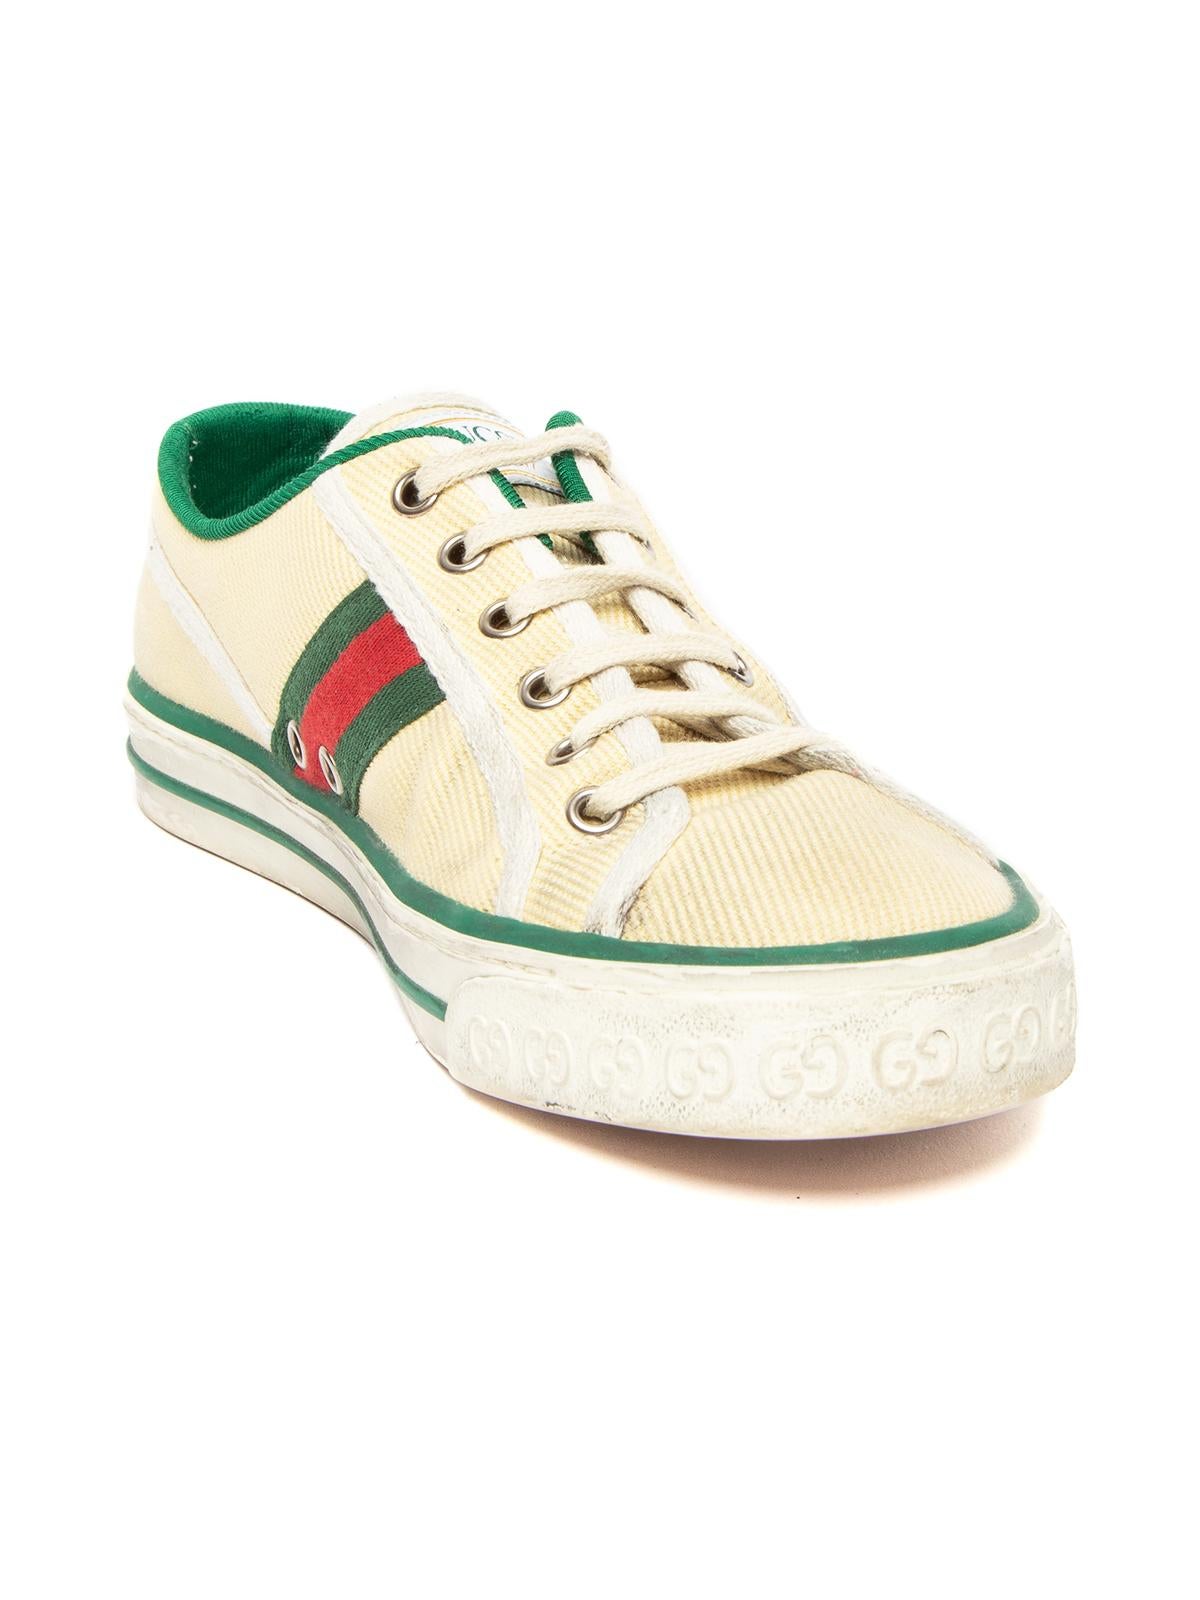 Gucci Tennis Shoes - 9 For Sale on 1stDibs | gucci gym shoes, black gucci  gym shoes, tennis gucci shoes